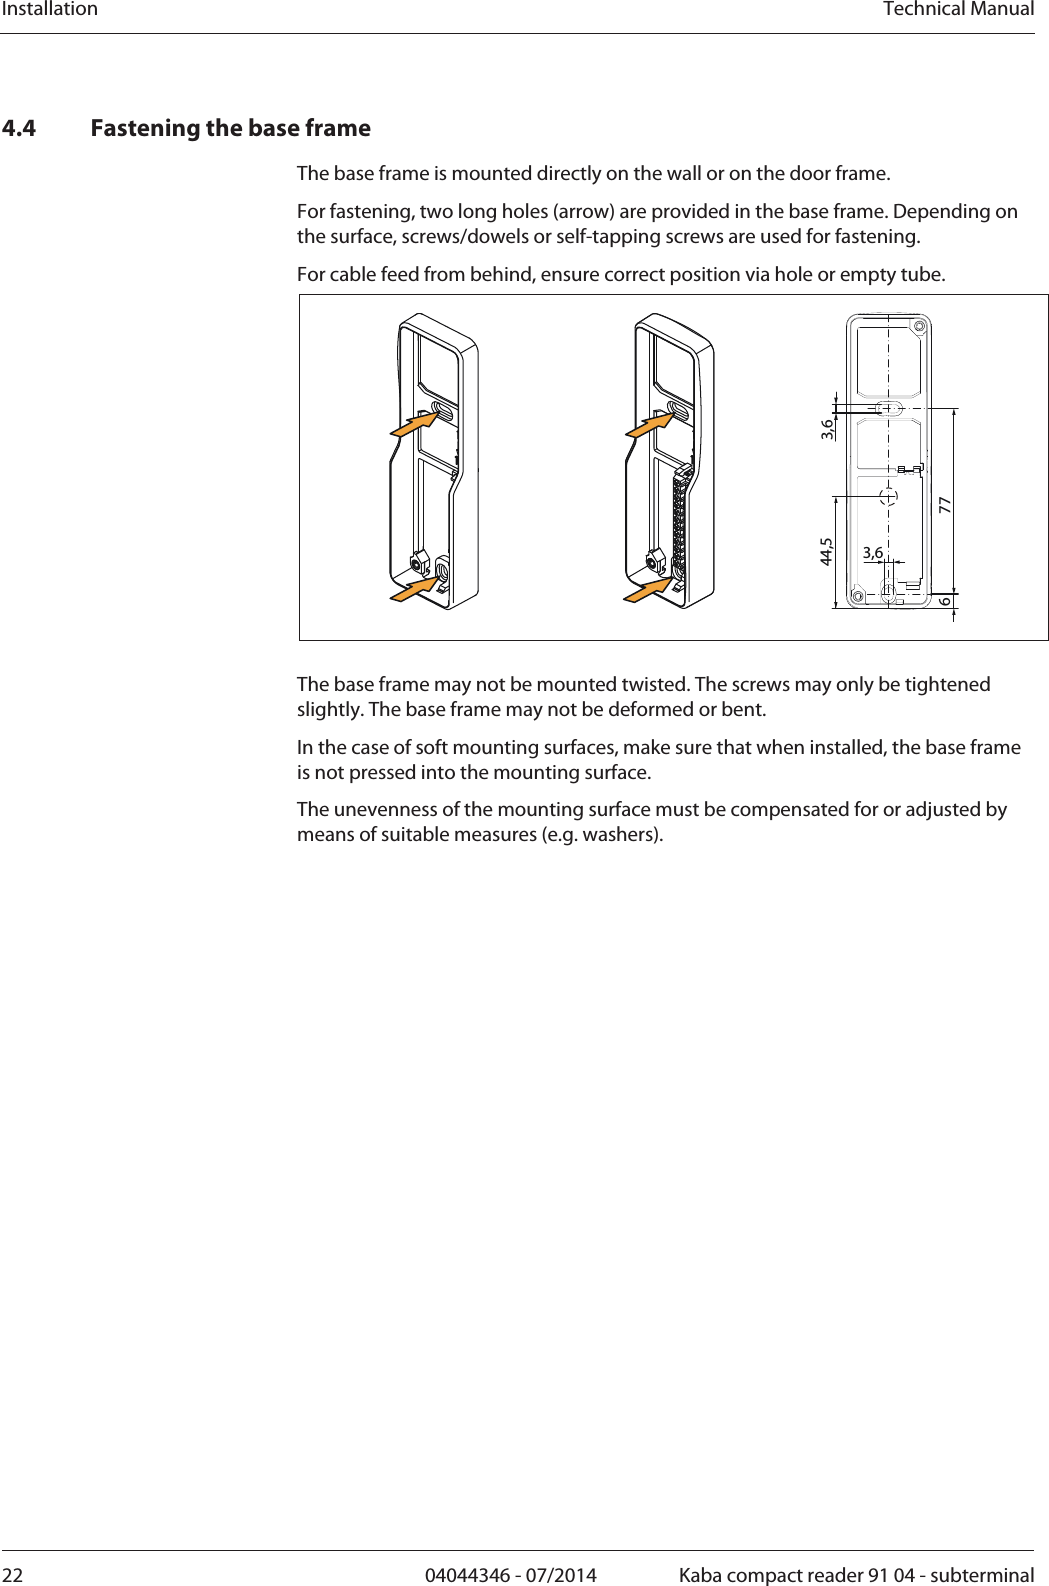 Installation  Technical Manual22  04044346 - 07/2014  Kaba compact reader 91 04 - subterminal4.4 Fastening the base frame The base frame is mounted directly on the wall or on the door frame.  For fastening, two long holes (arrow) are provided in the base frame. Depending on the surface, screws/dowels or self-tapping screws are used for fastening. For cable feed from behind, ensure correct position via hole or empty tube. 3,63,677644,5  The base frame may not be mounted twisted. The screws may only be tightened slightly. The base frame may not be deformed or bent.  In the case of soft mounting surfaces, make sure that when installed, the base frame is not pressed into the mounting surface. The unevenness of the mounting surface must be compensated for or adjusted by means of suitable measures (e.g. washers). 